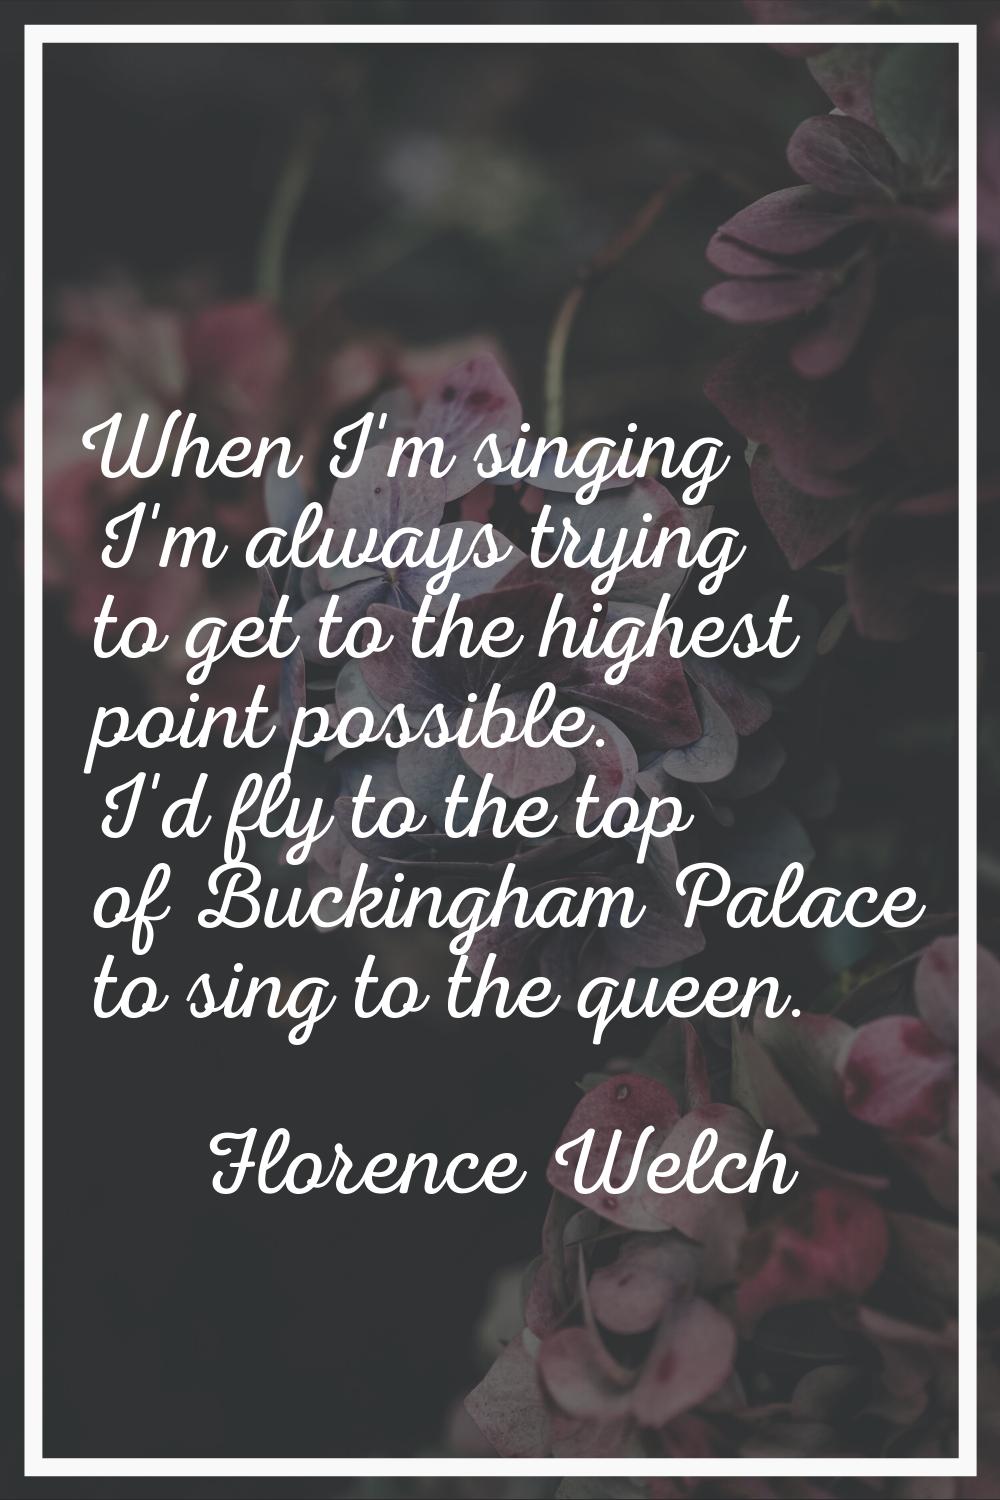 When I'm singing I'm always trying to get to the highest point possible. I'd fly to the top of Buck